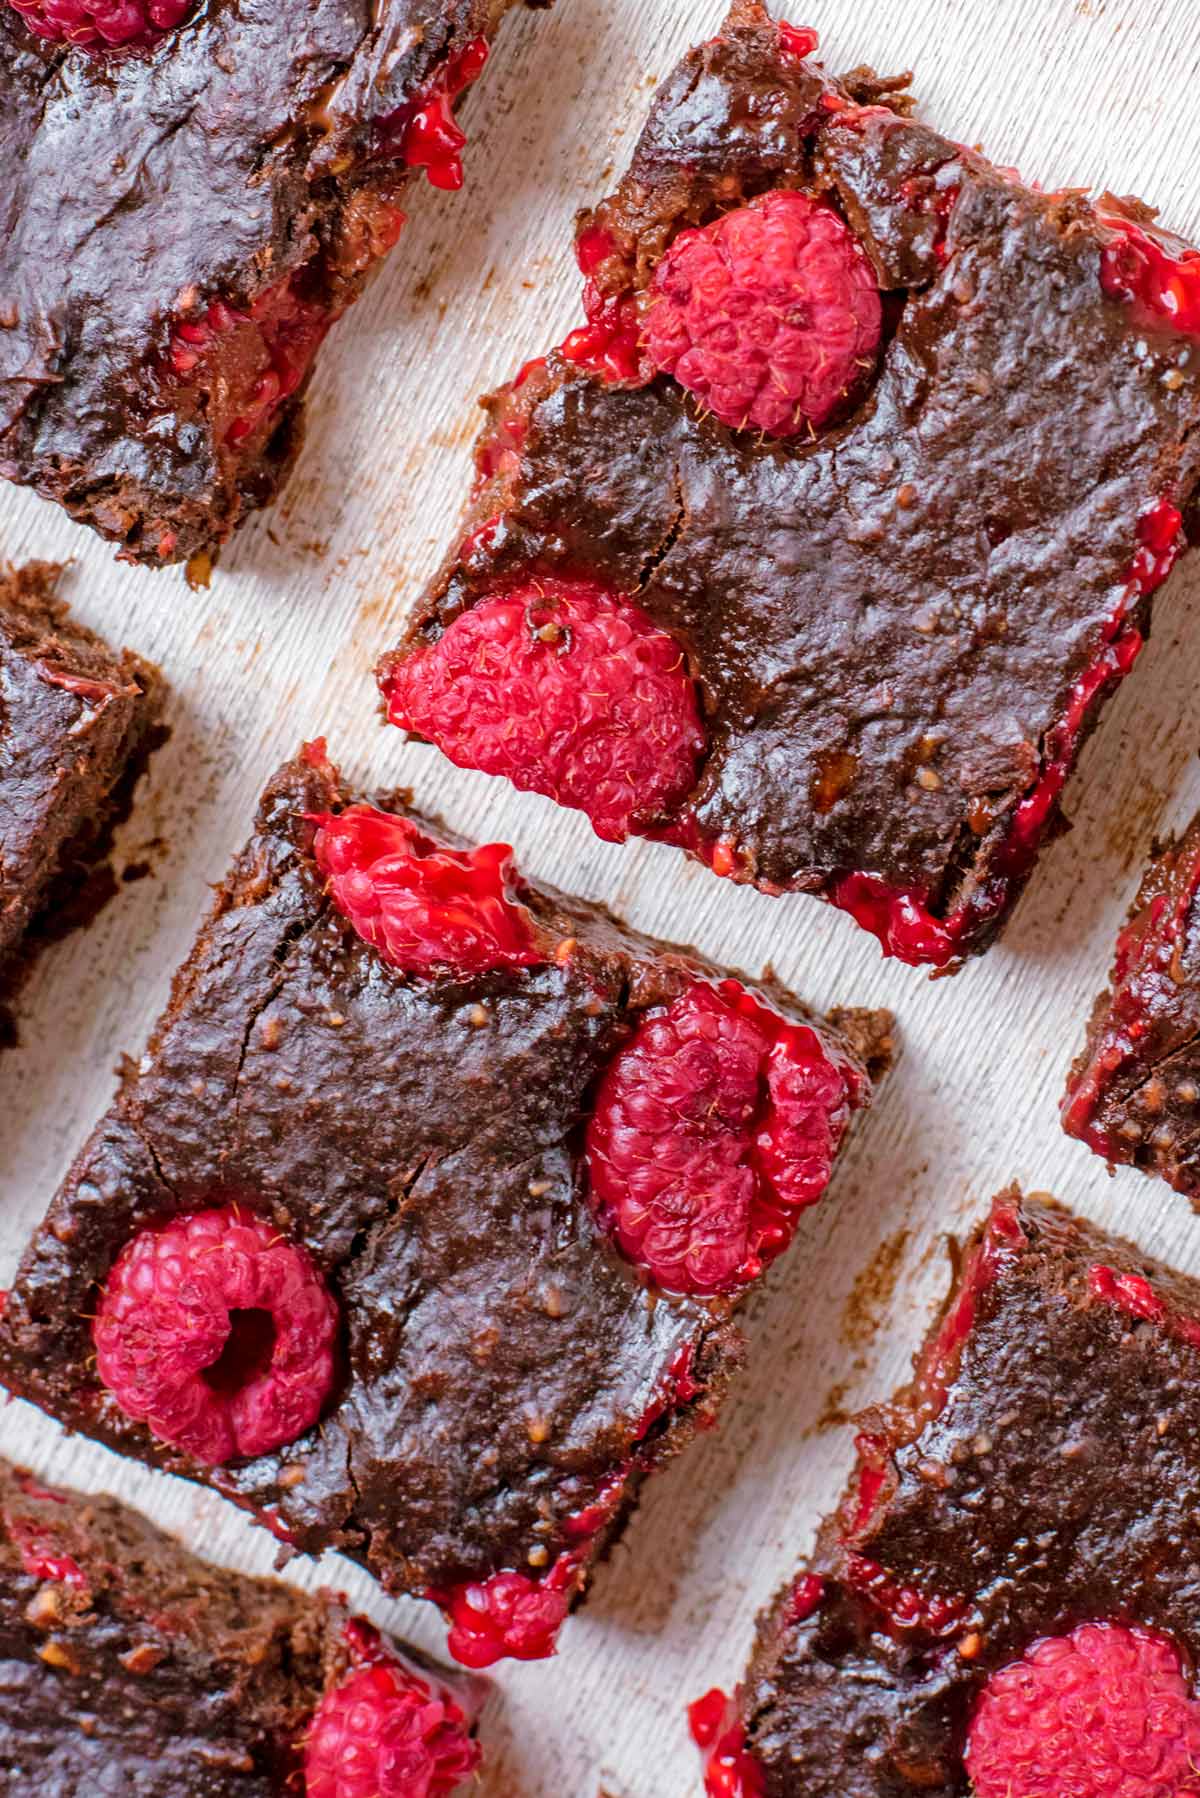 Chocolate Raspberry Brownies cut into squares.